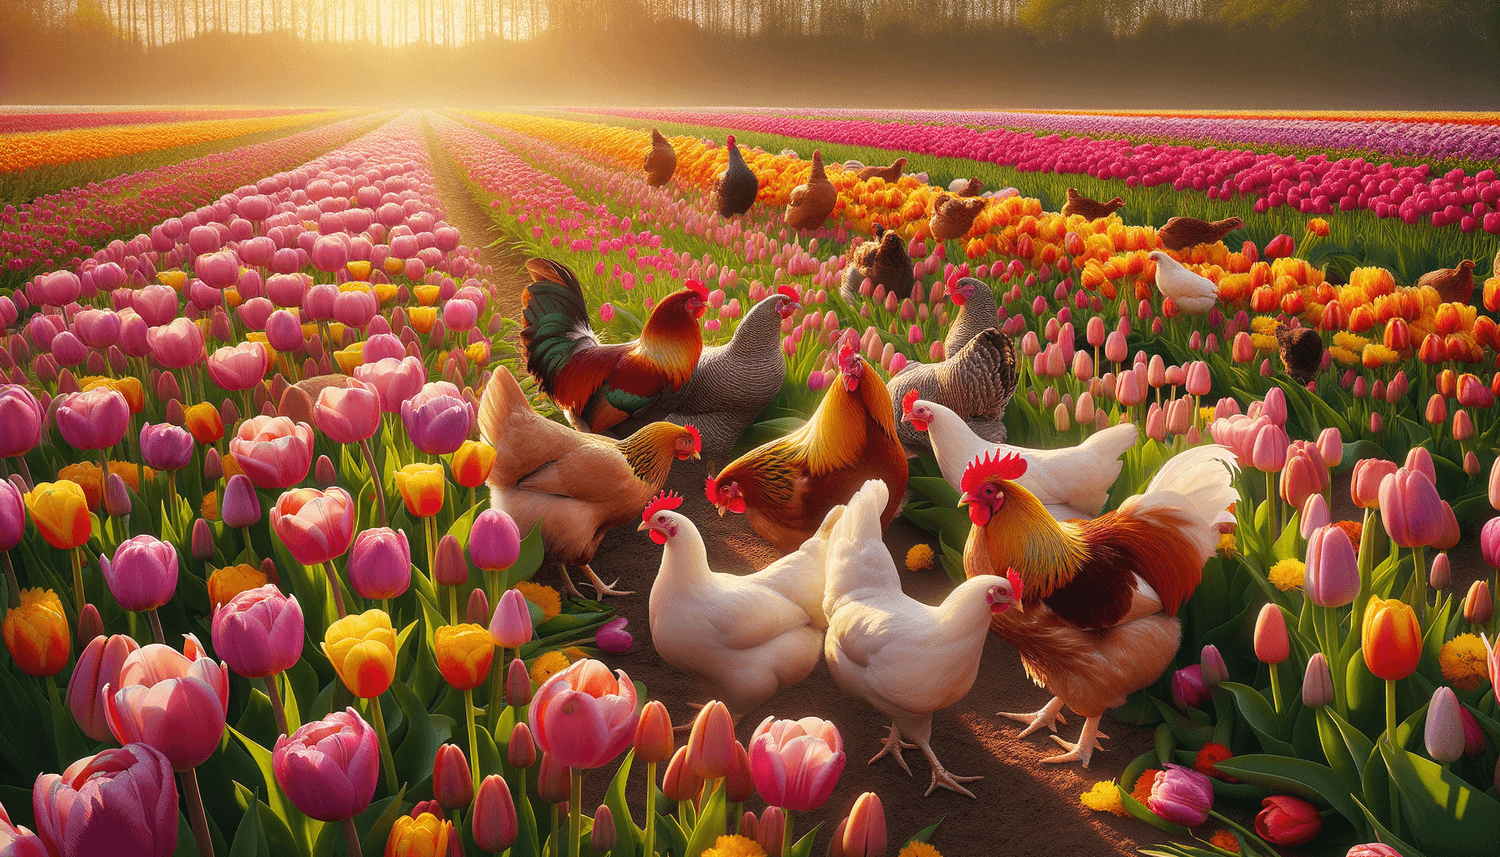 Can Chickens Eat Tulips?